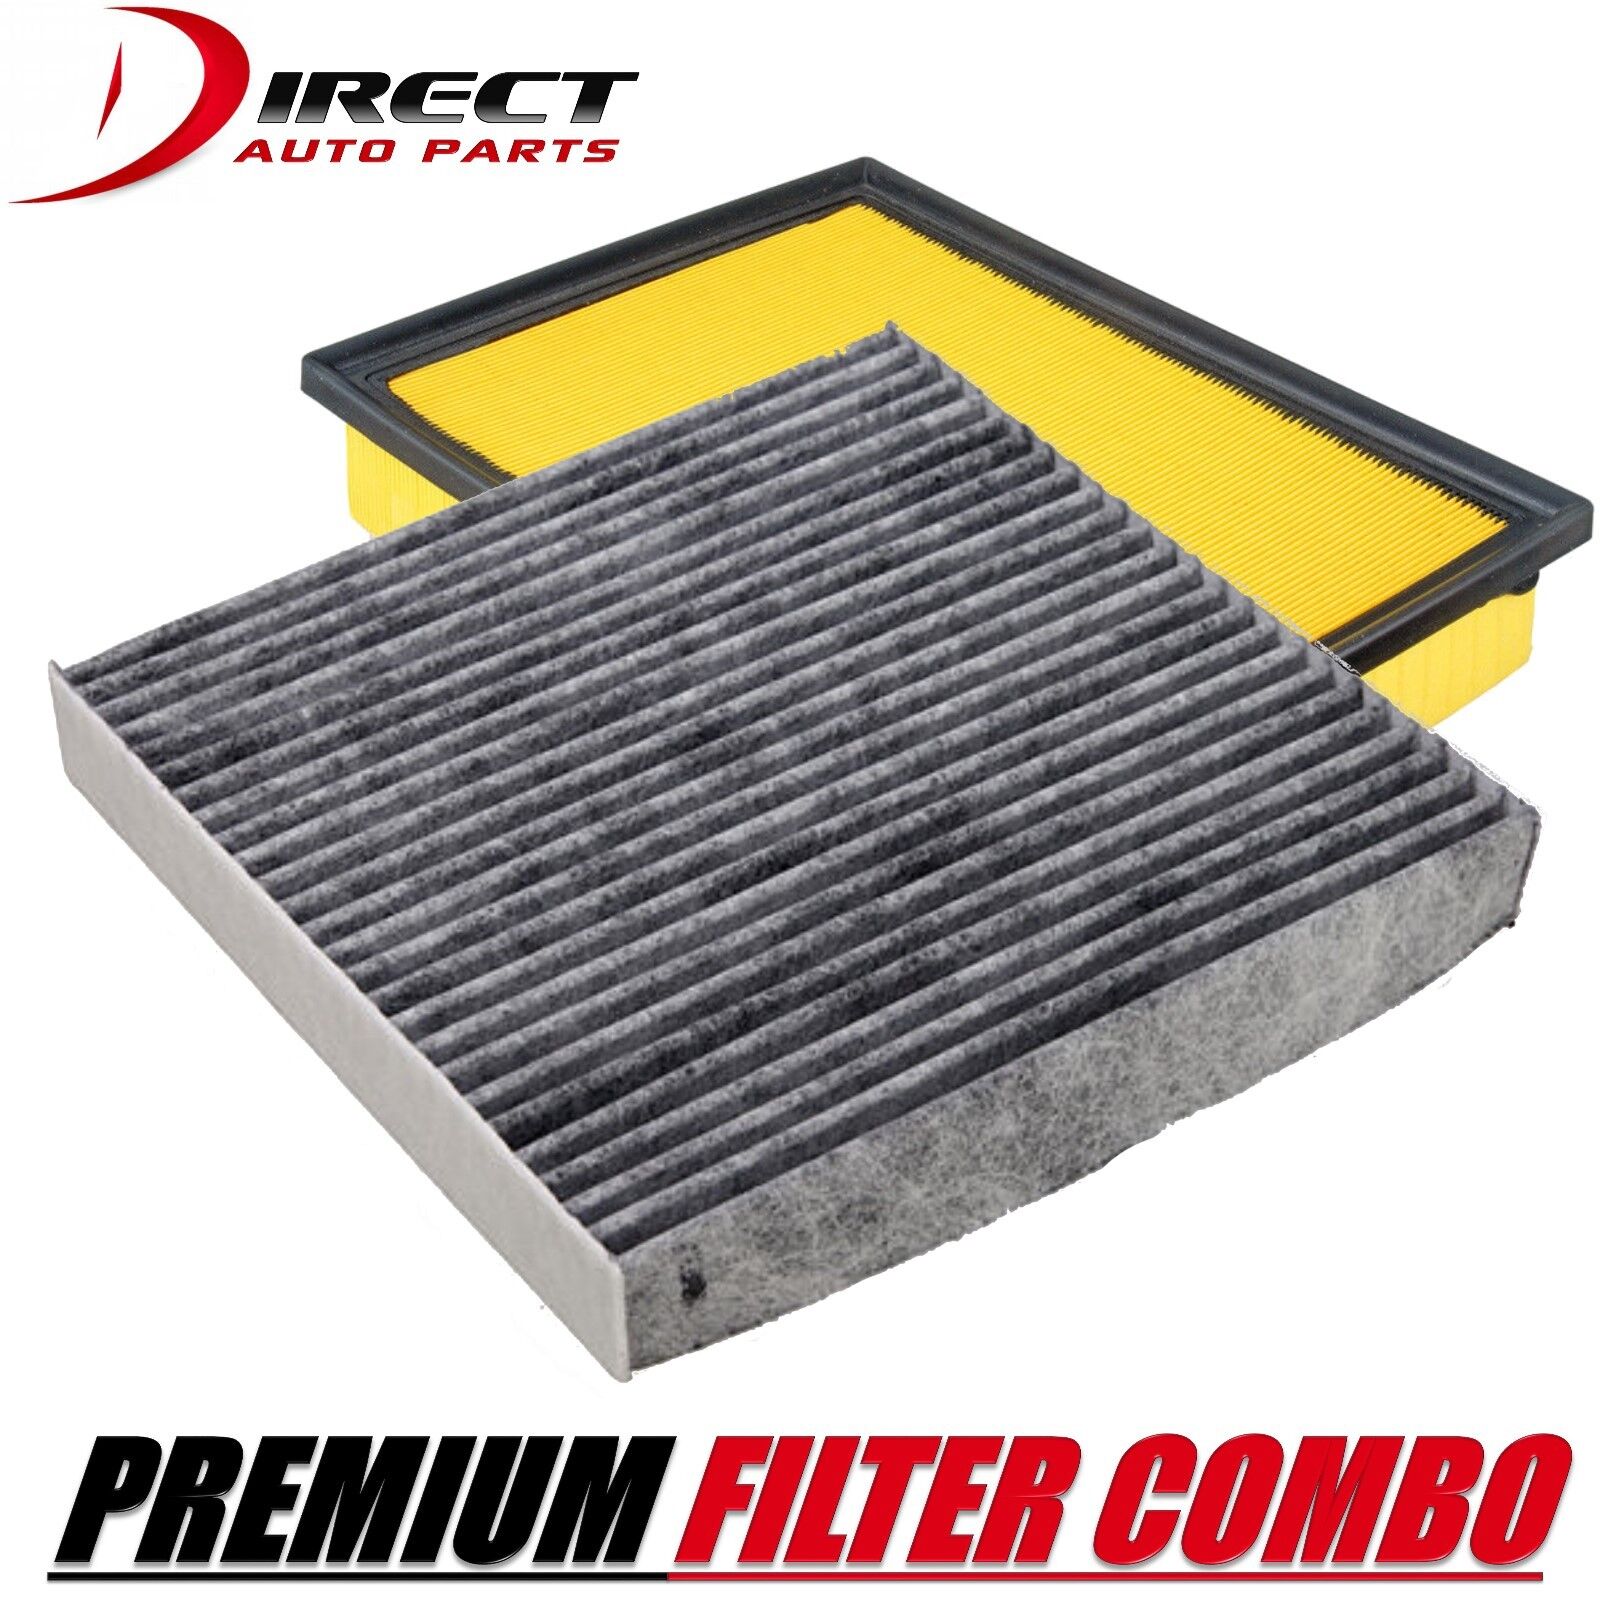 CARBON CABIN & AIR FILTER COMBO FOR TOYOTA PRIUS 1.8L ENGINE 2015 - 2010